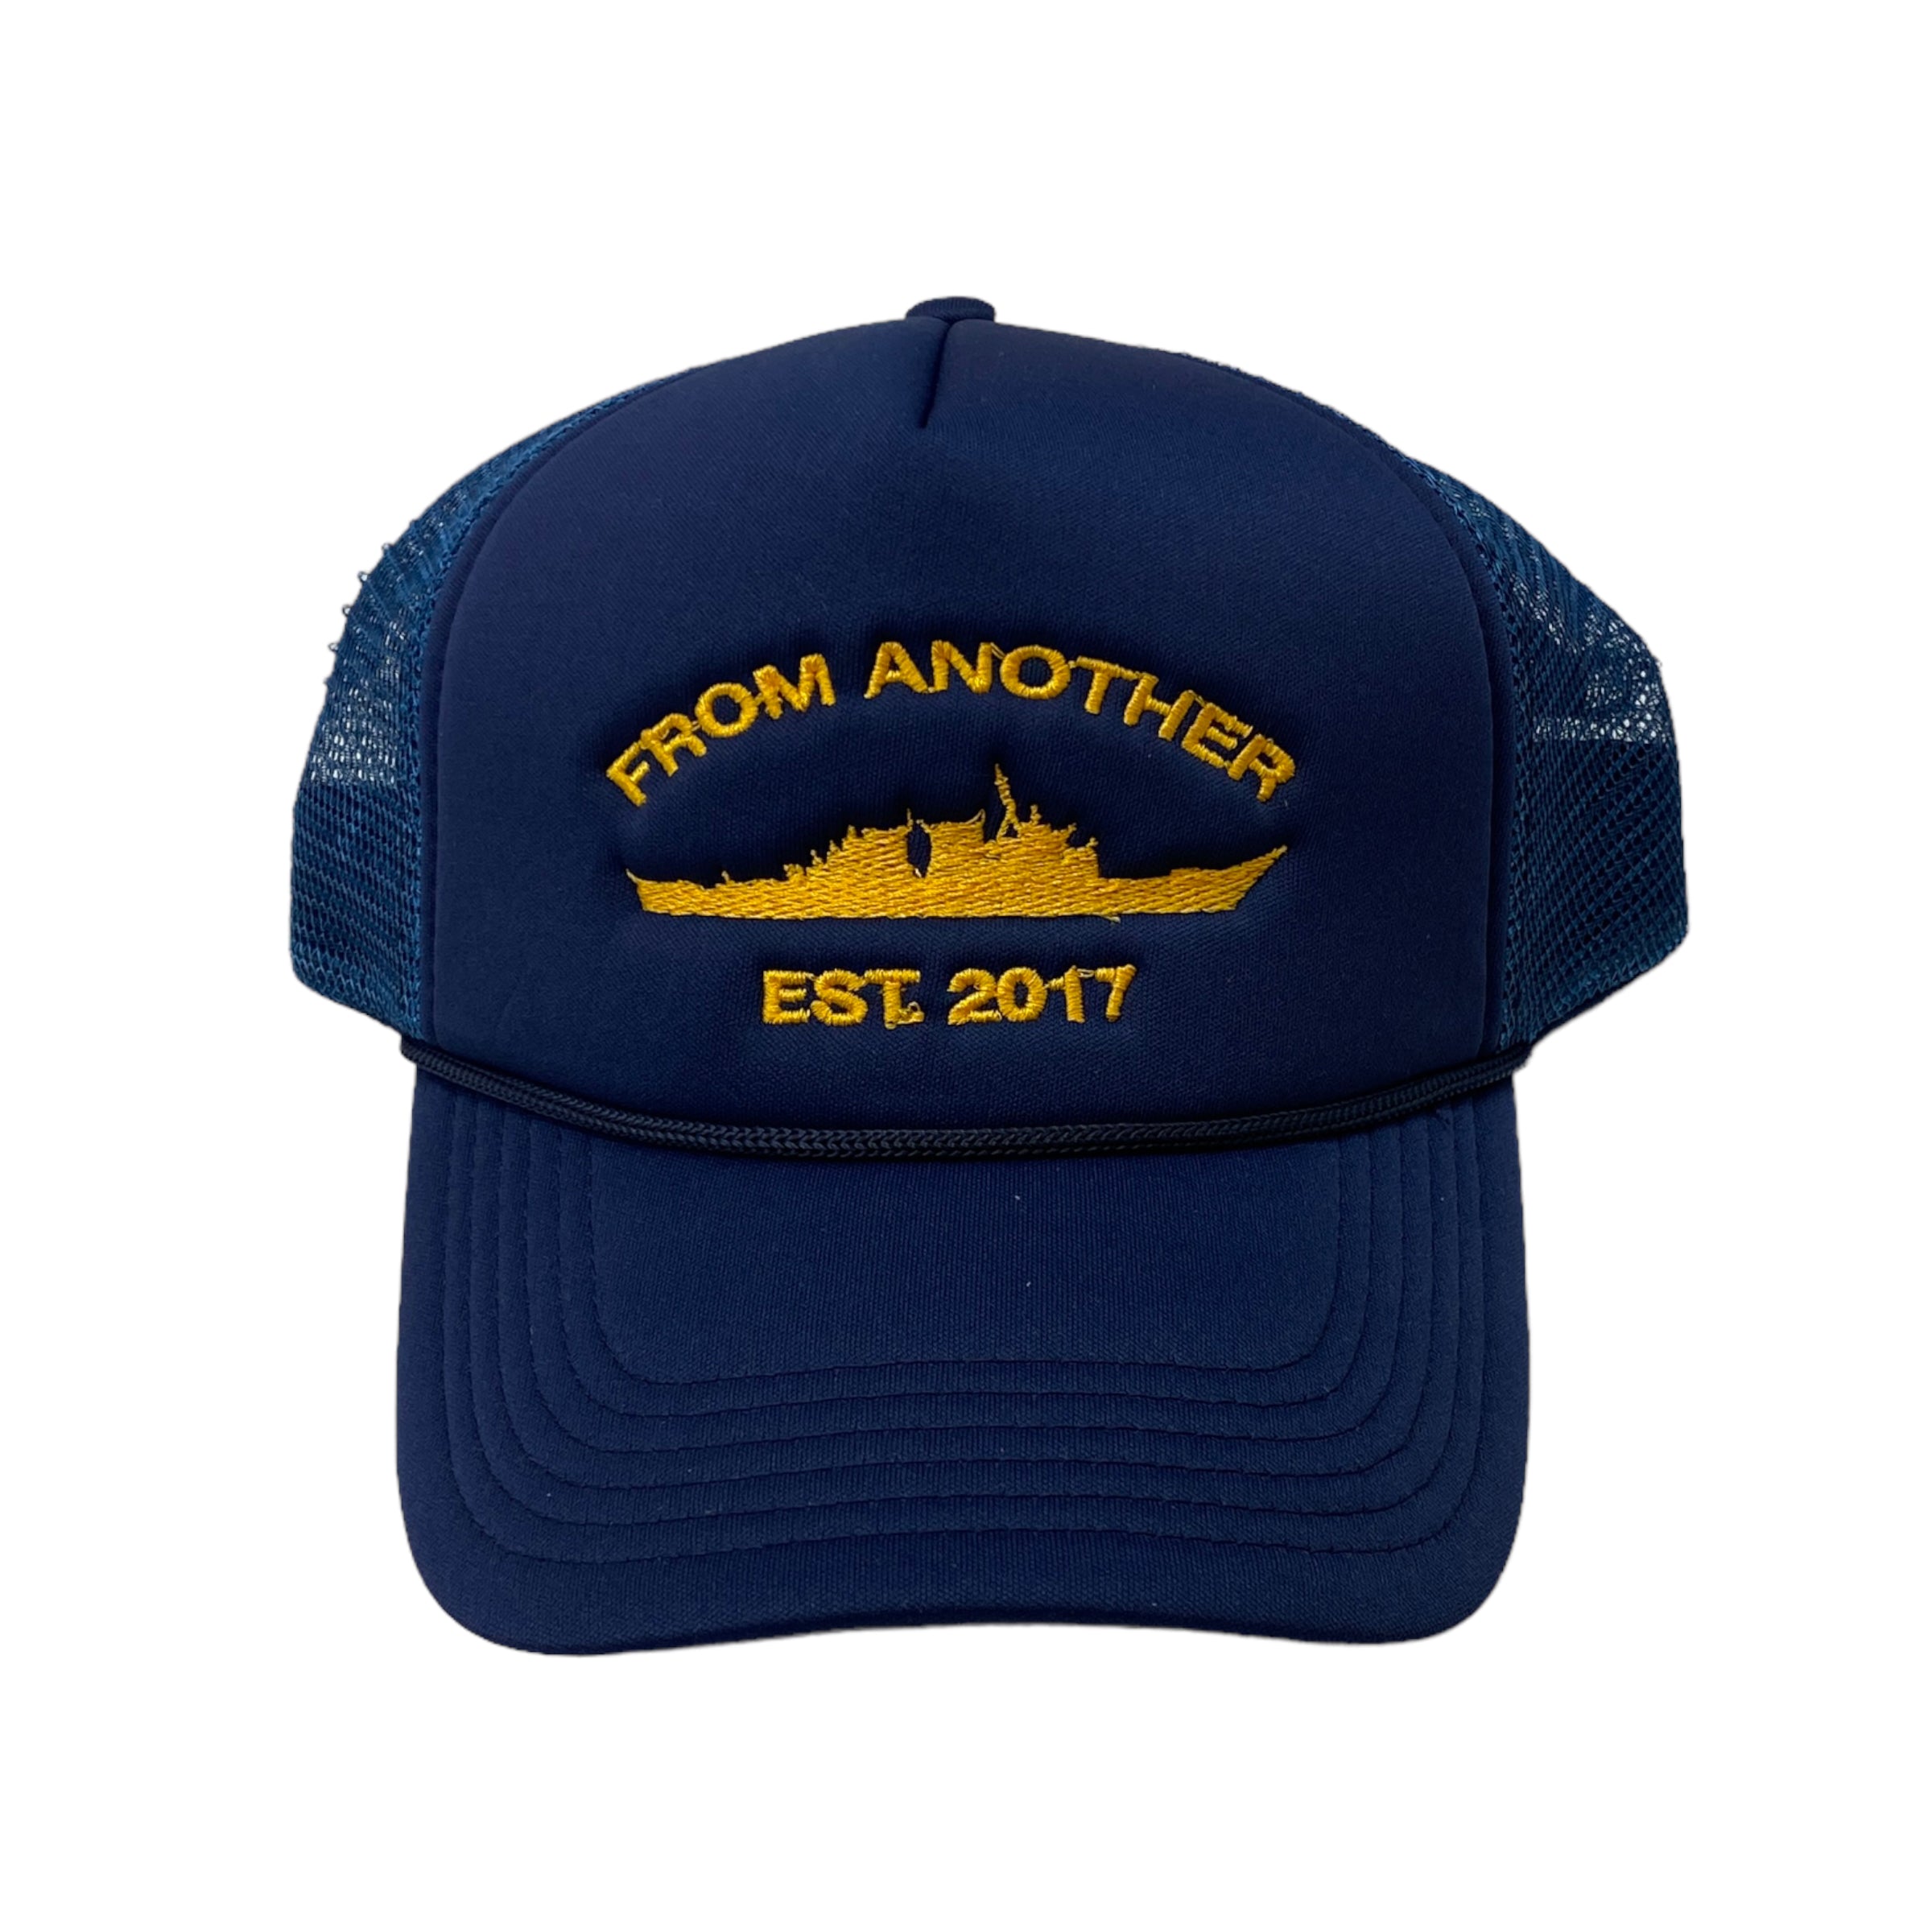 From Another Est. 2017 Trucker Hat Navy